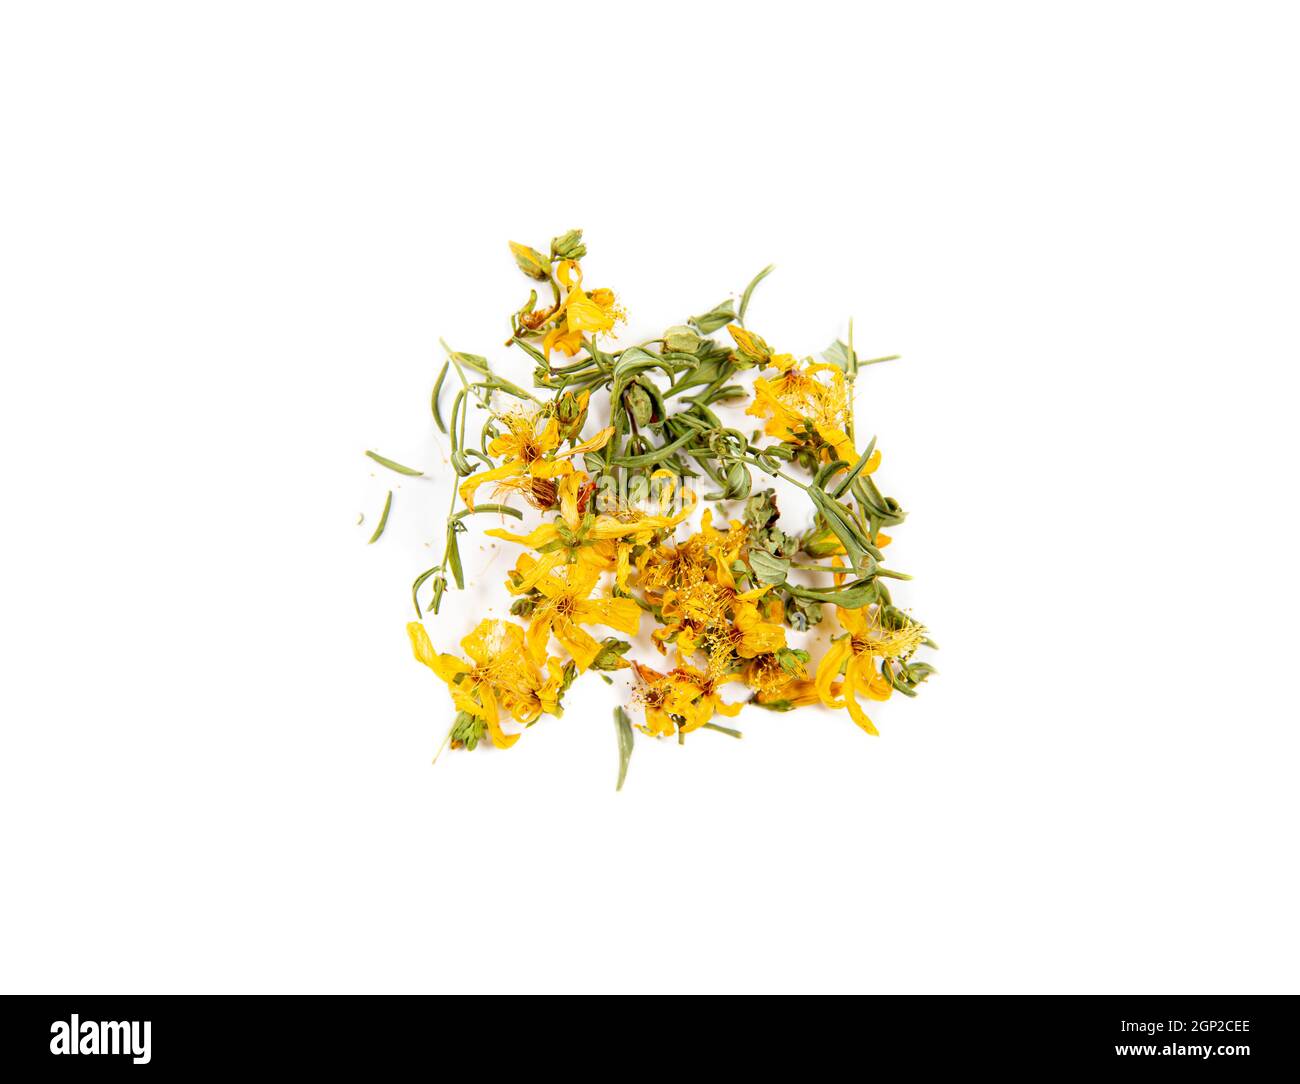 Dried Hypericum perforatum known as perforate St John's-wort plant flowers and leaf isolated on white background. Herbal medicine concept. Stock Photo